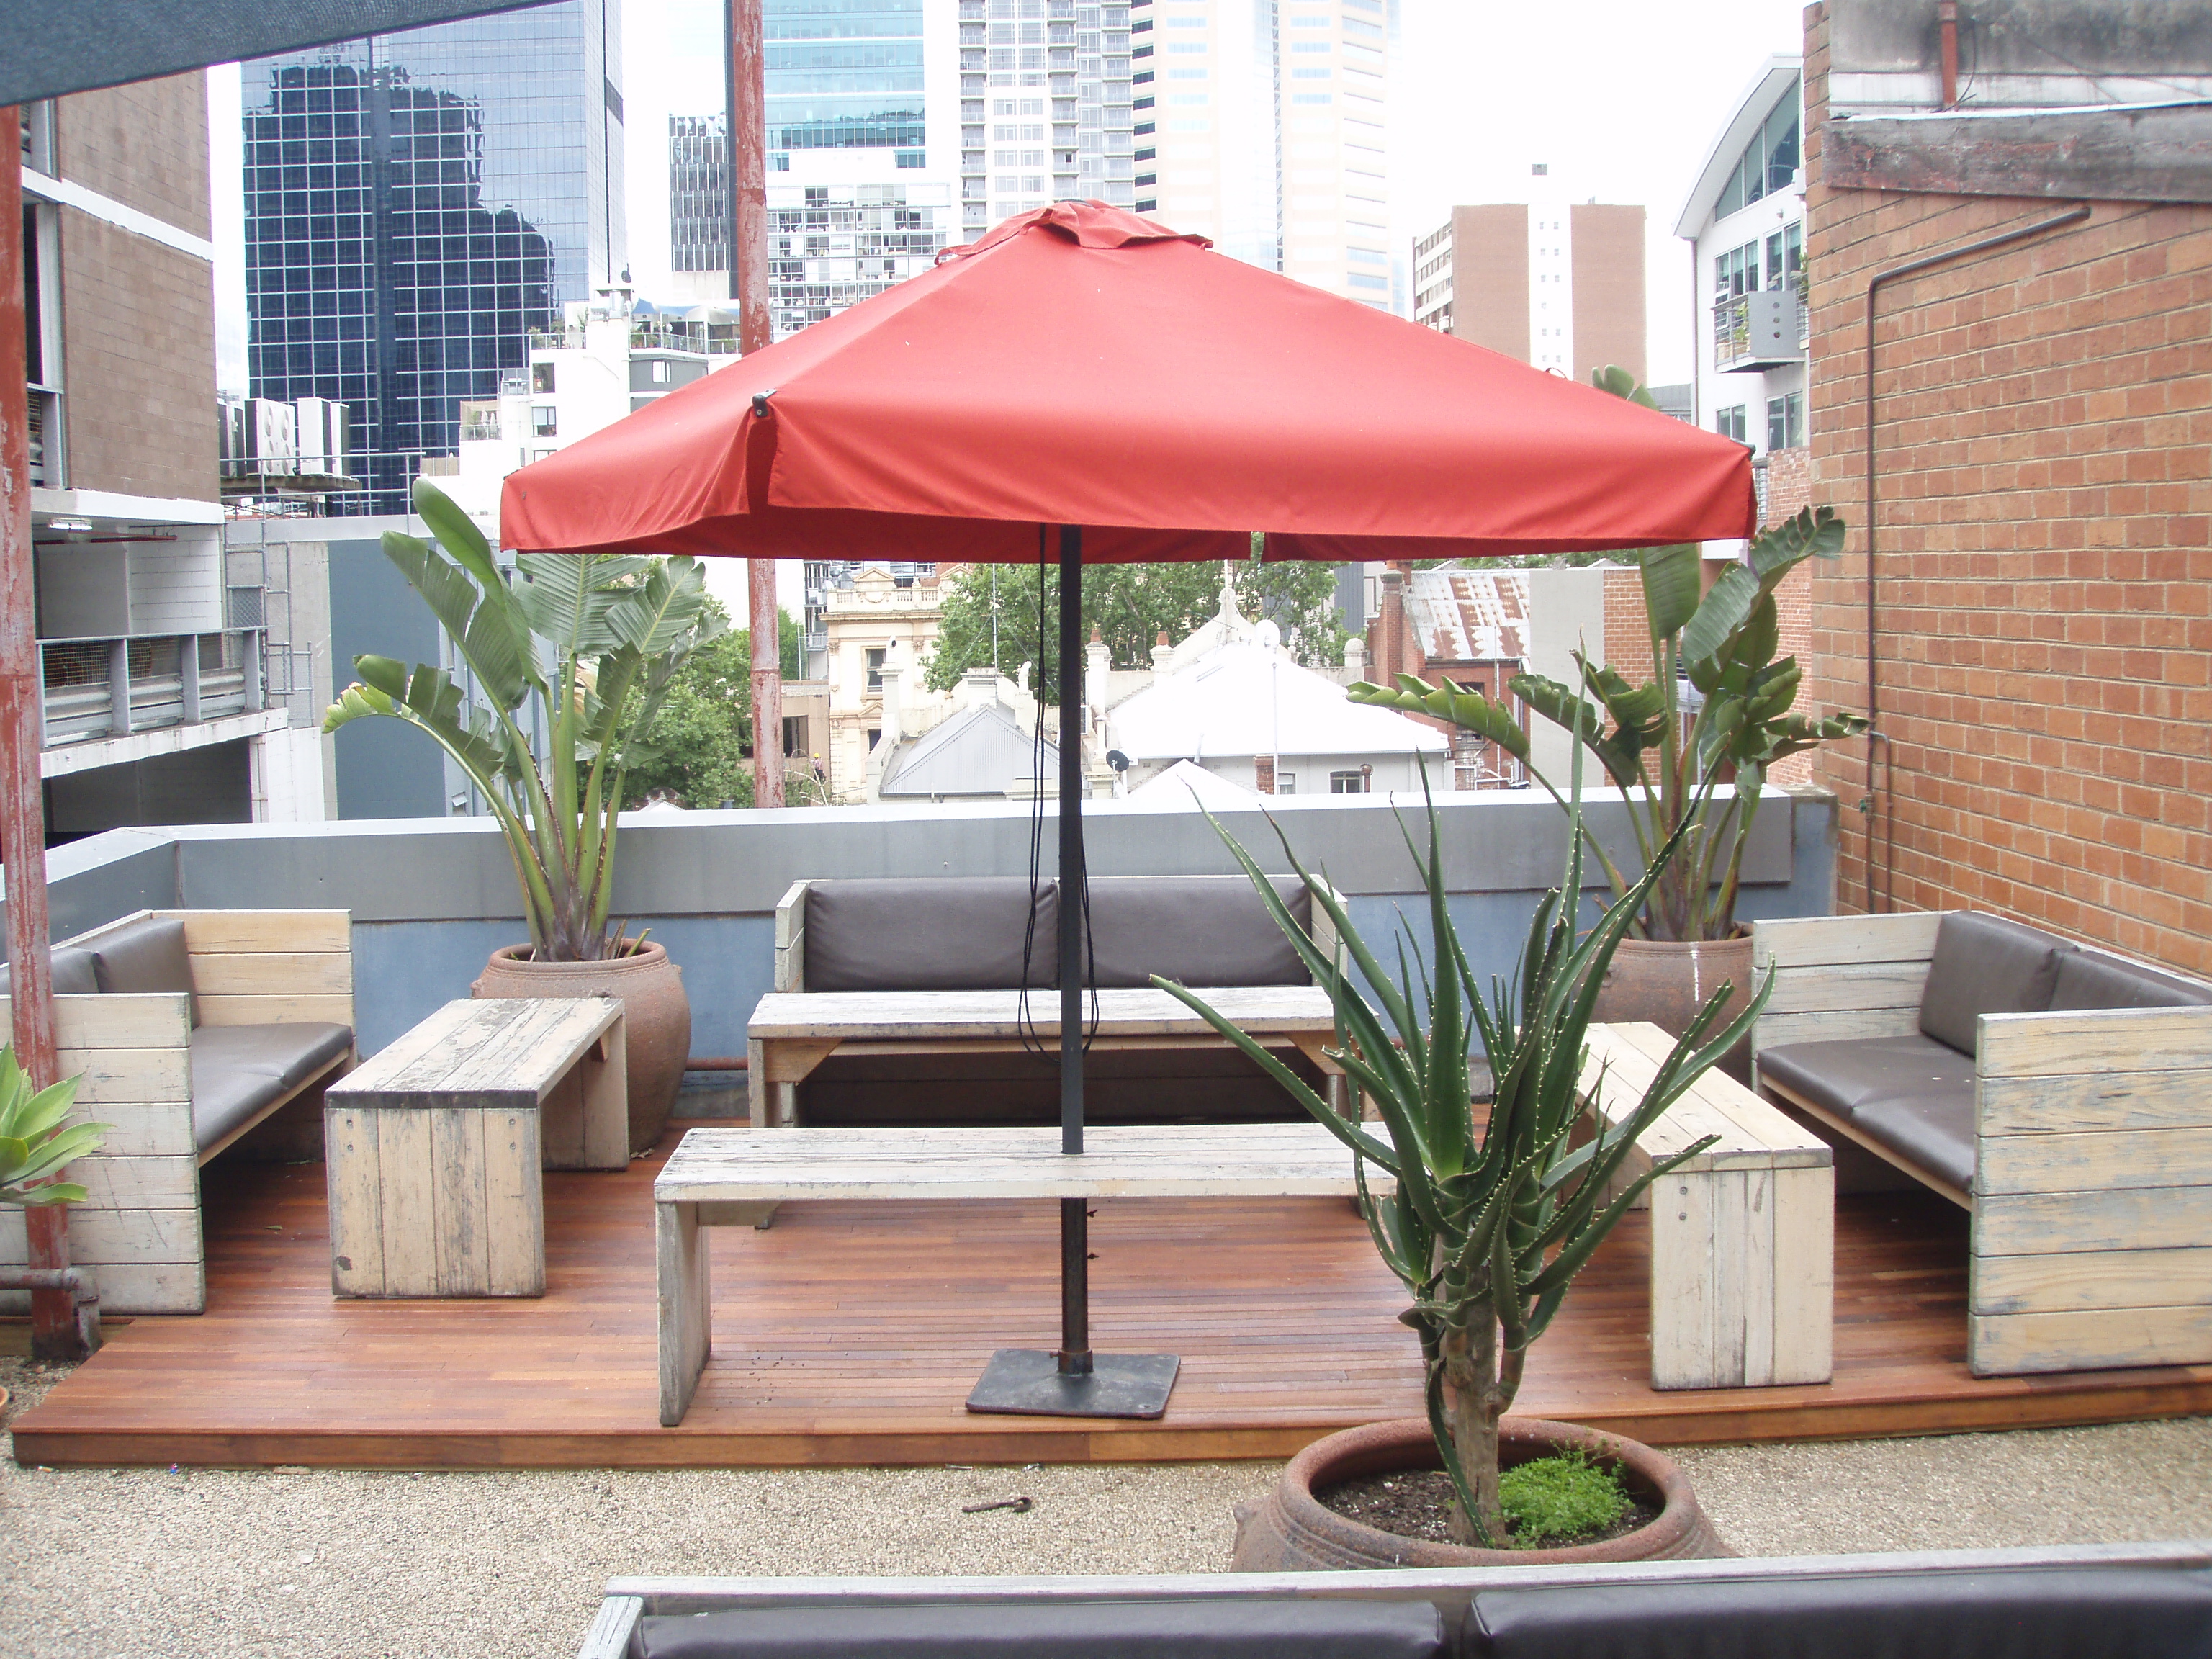 Roof Top Patio at City Centre Budget Hotel - click to see an enlarged version of this image